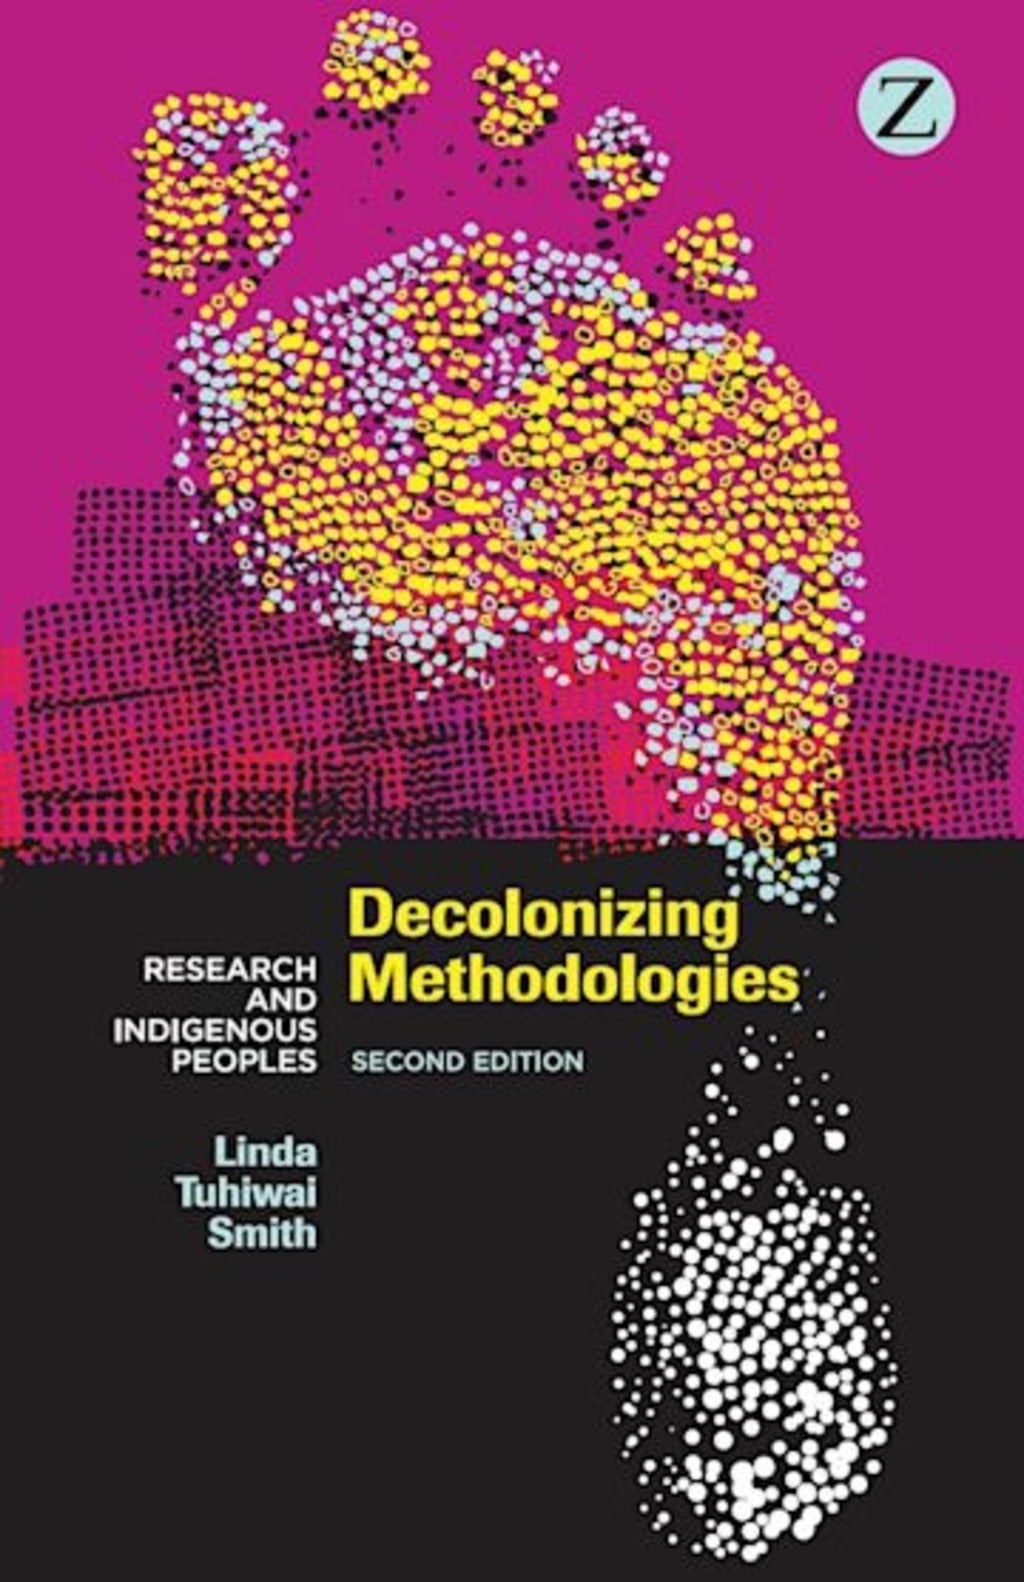 Decolonizing Methodologies for Sustainability Research: A discussion with Prof. Linda Tuhiwai Smith